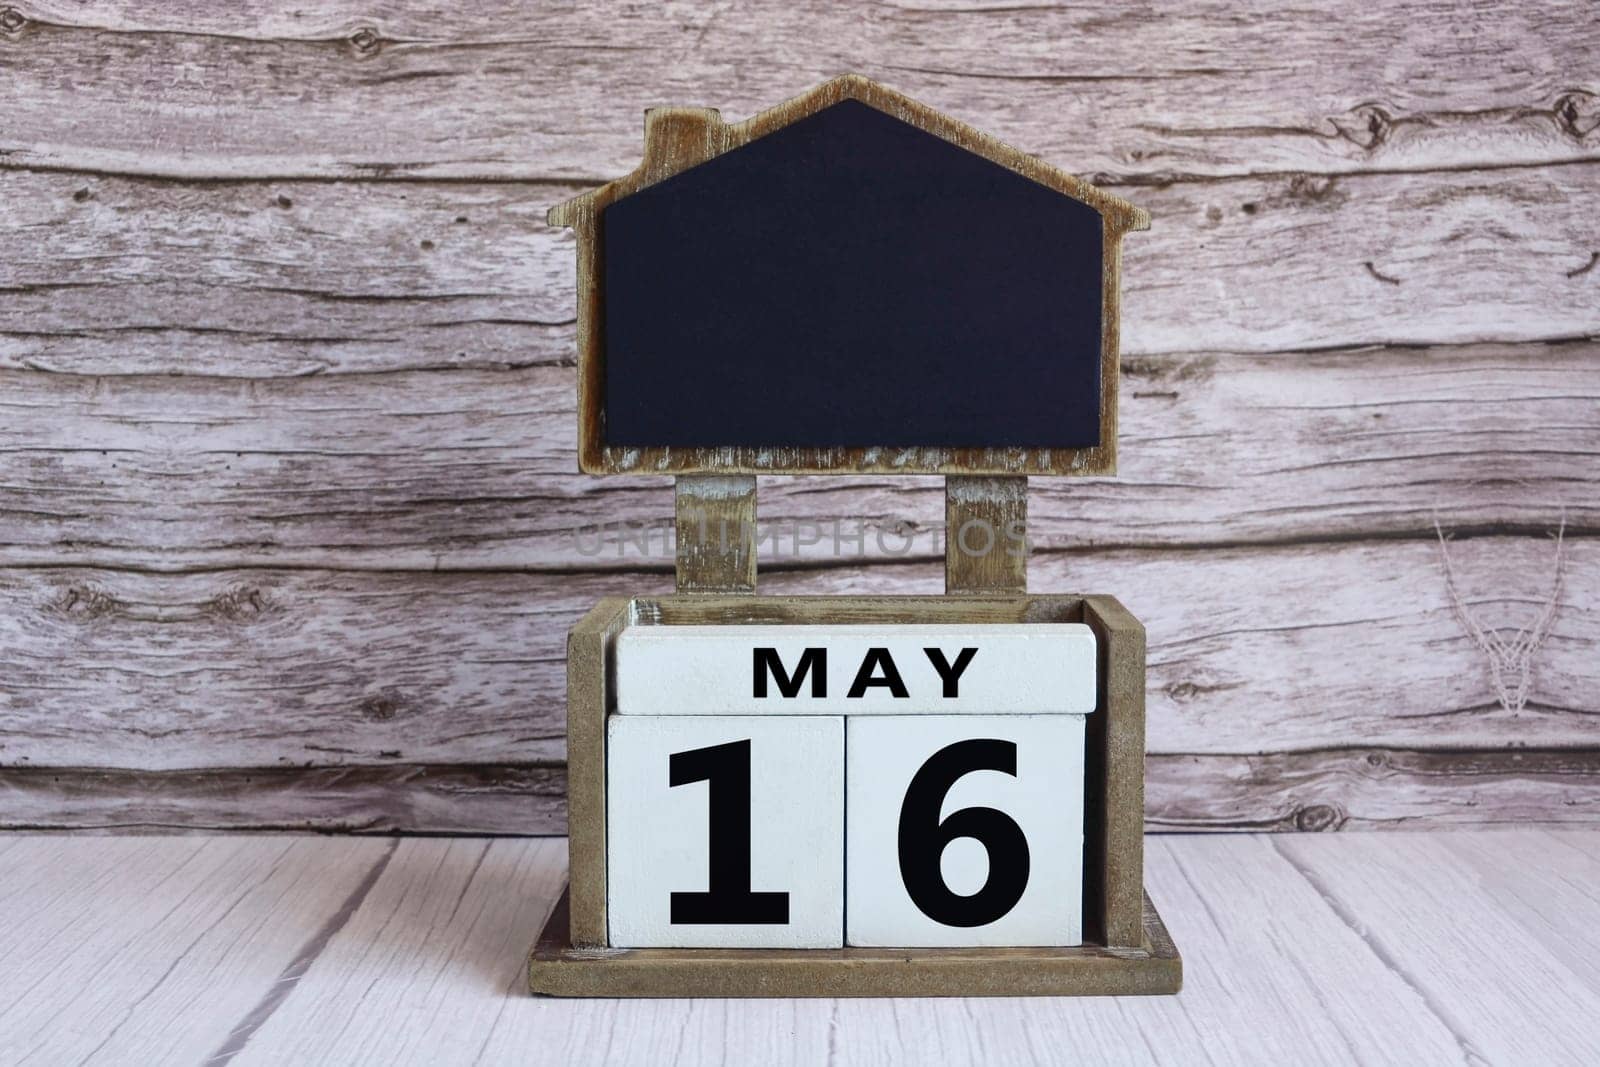 Chalkboard with May 16 calendar date on white cube block on wooden table.